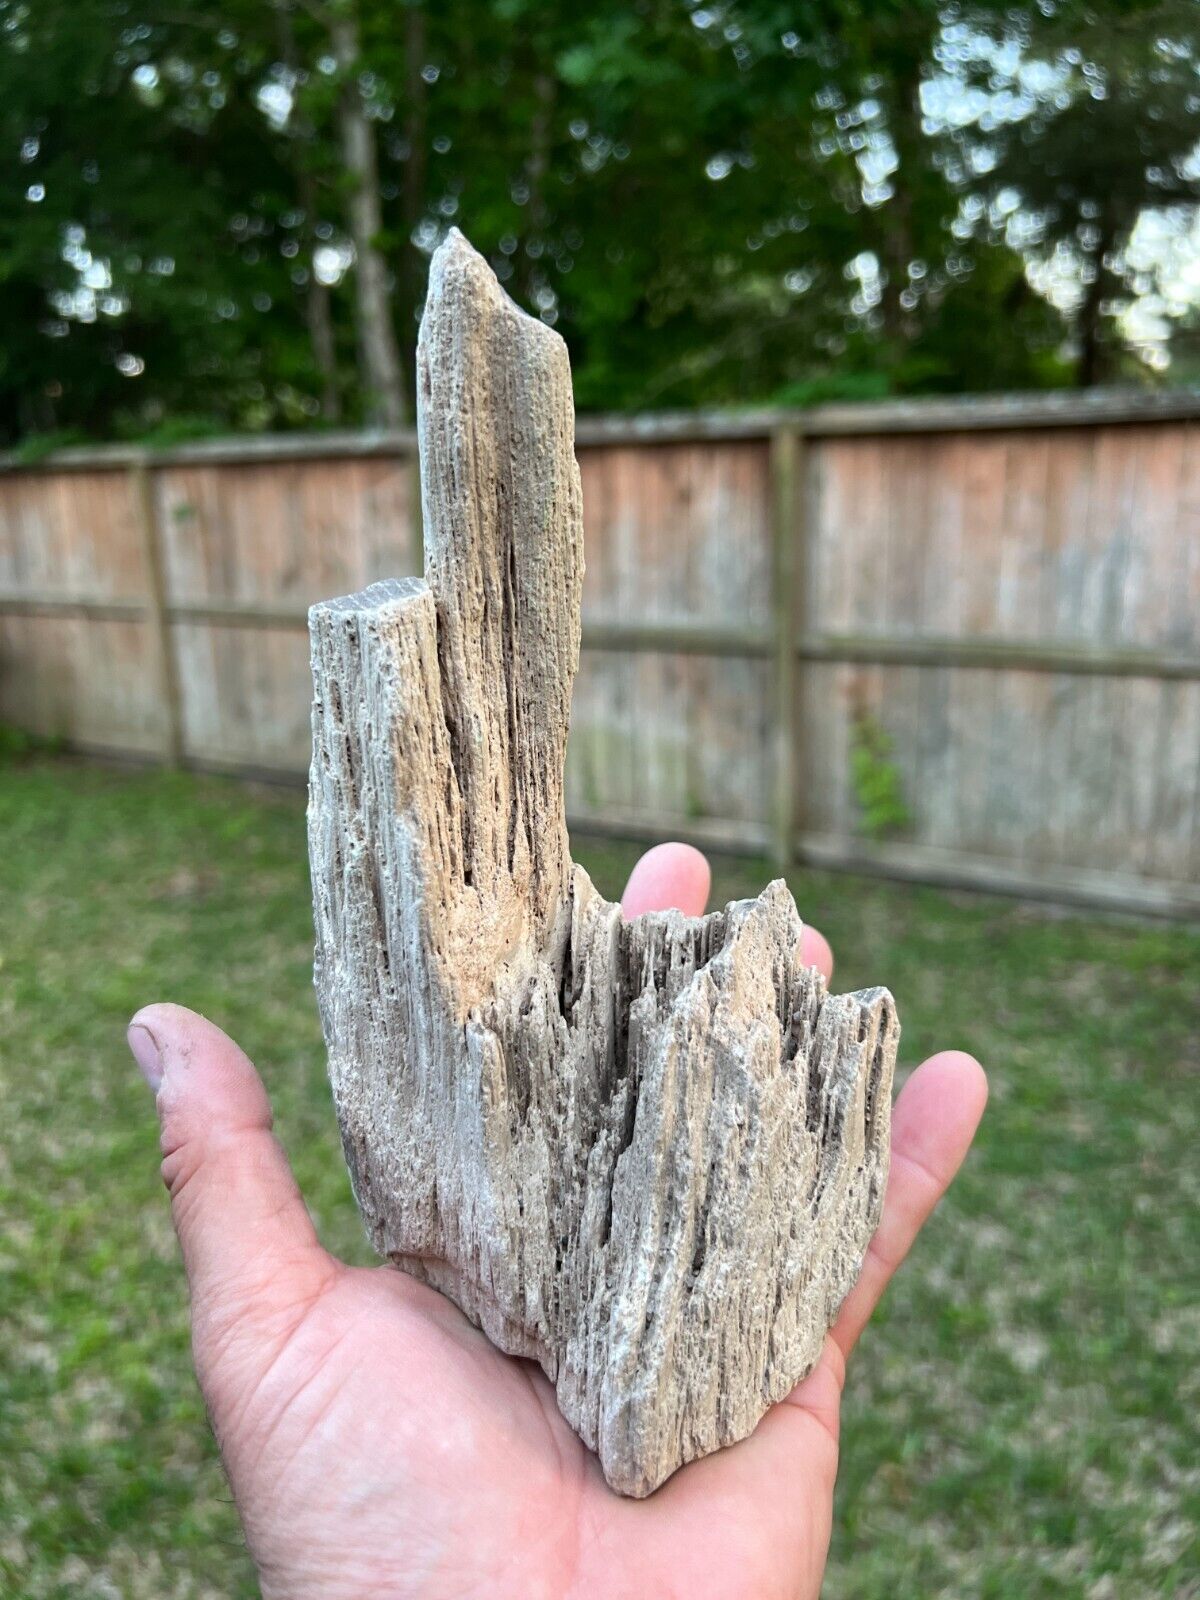 Texas Petrified Wood 7.5x4x3 Live Oak Branch End Piece Beaumont Formation Fossil